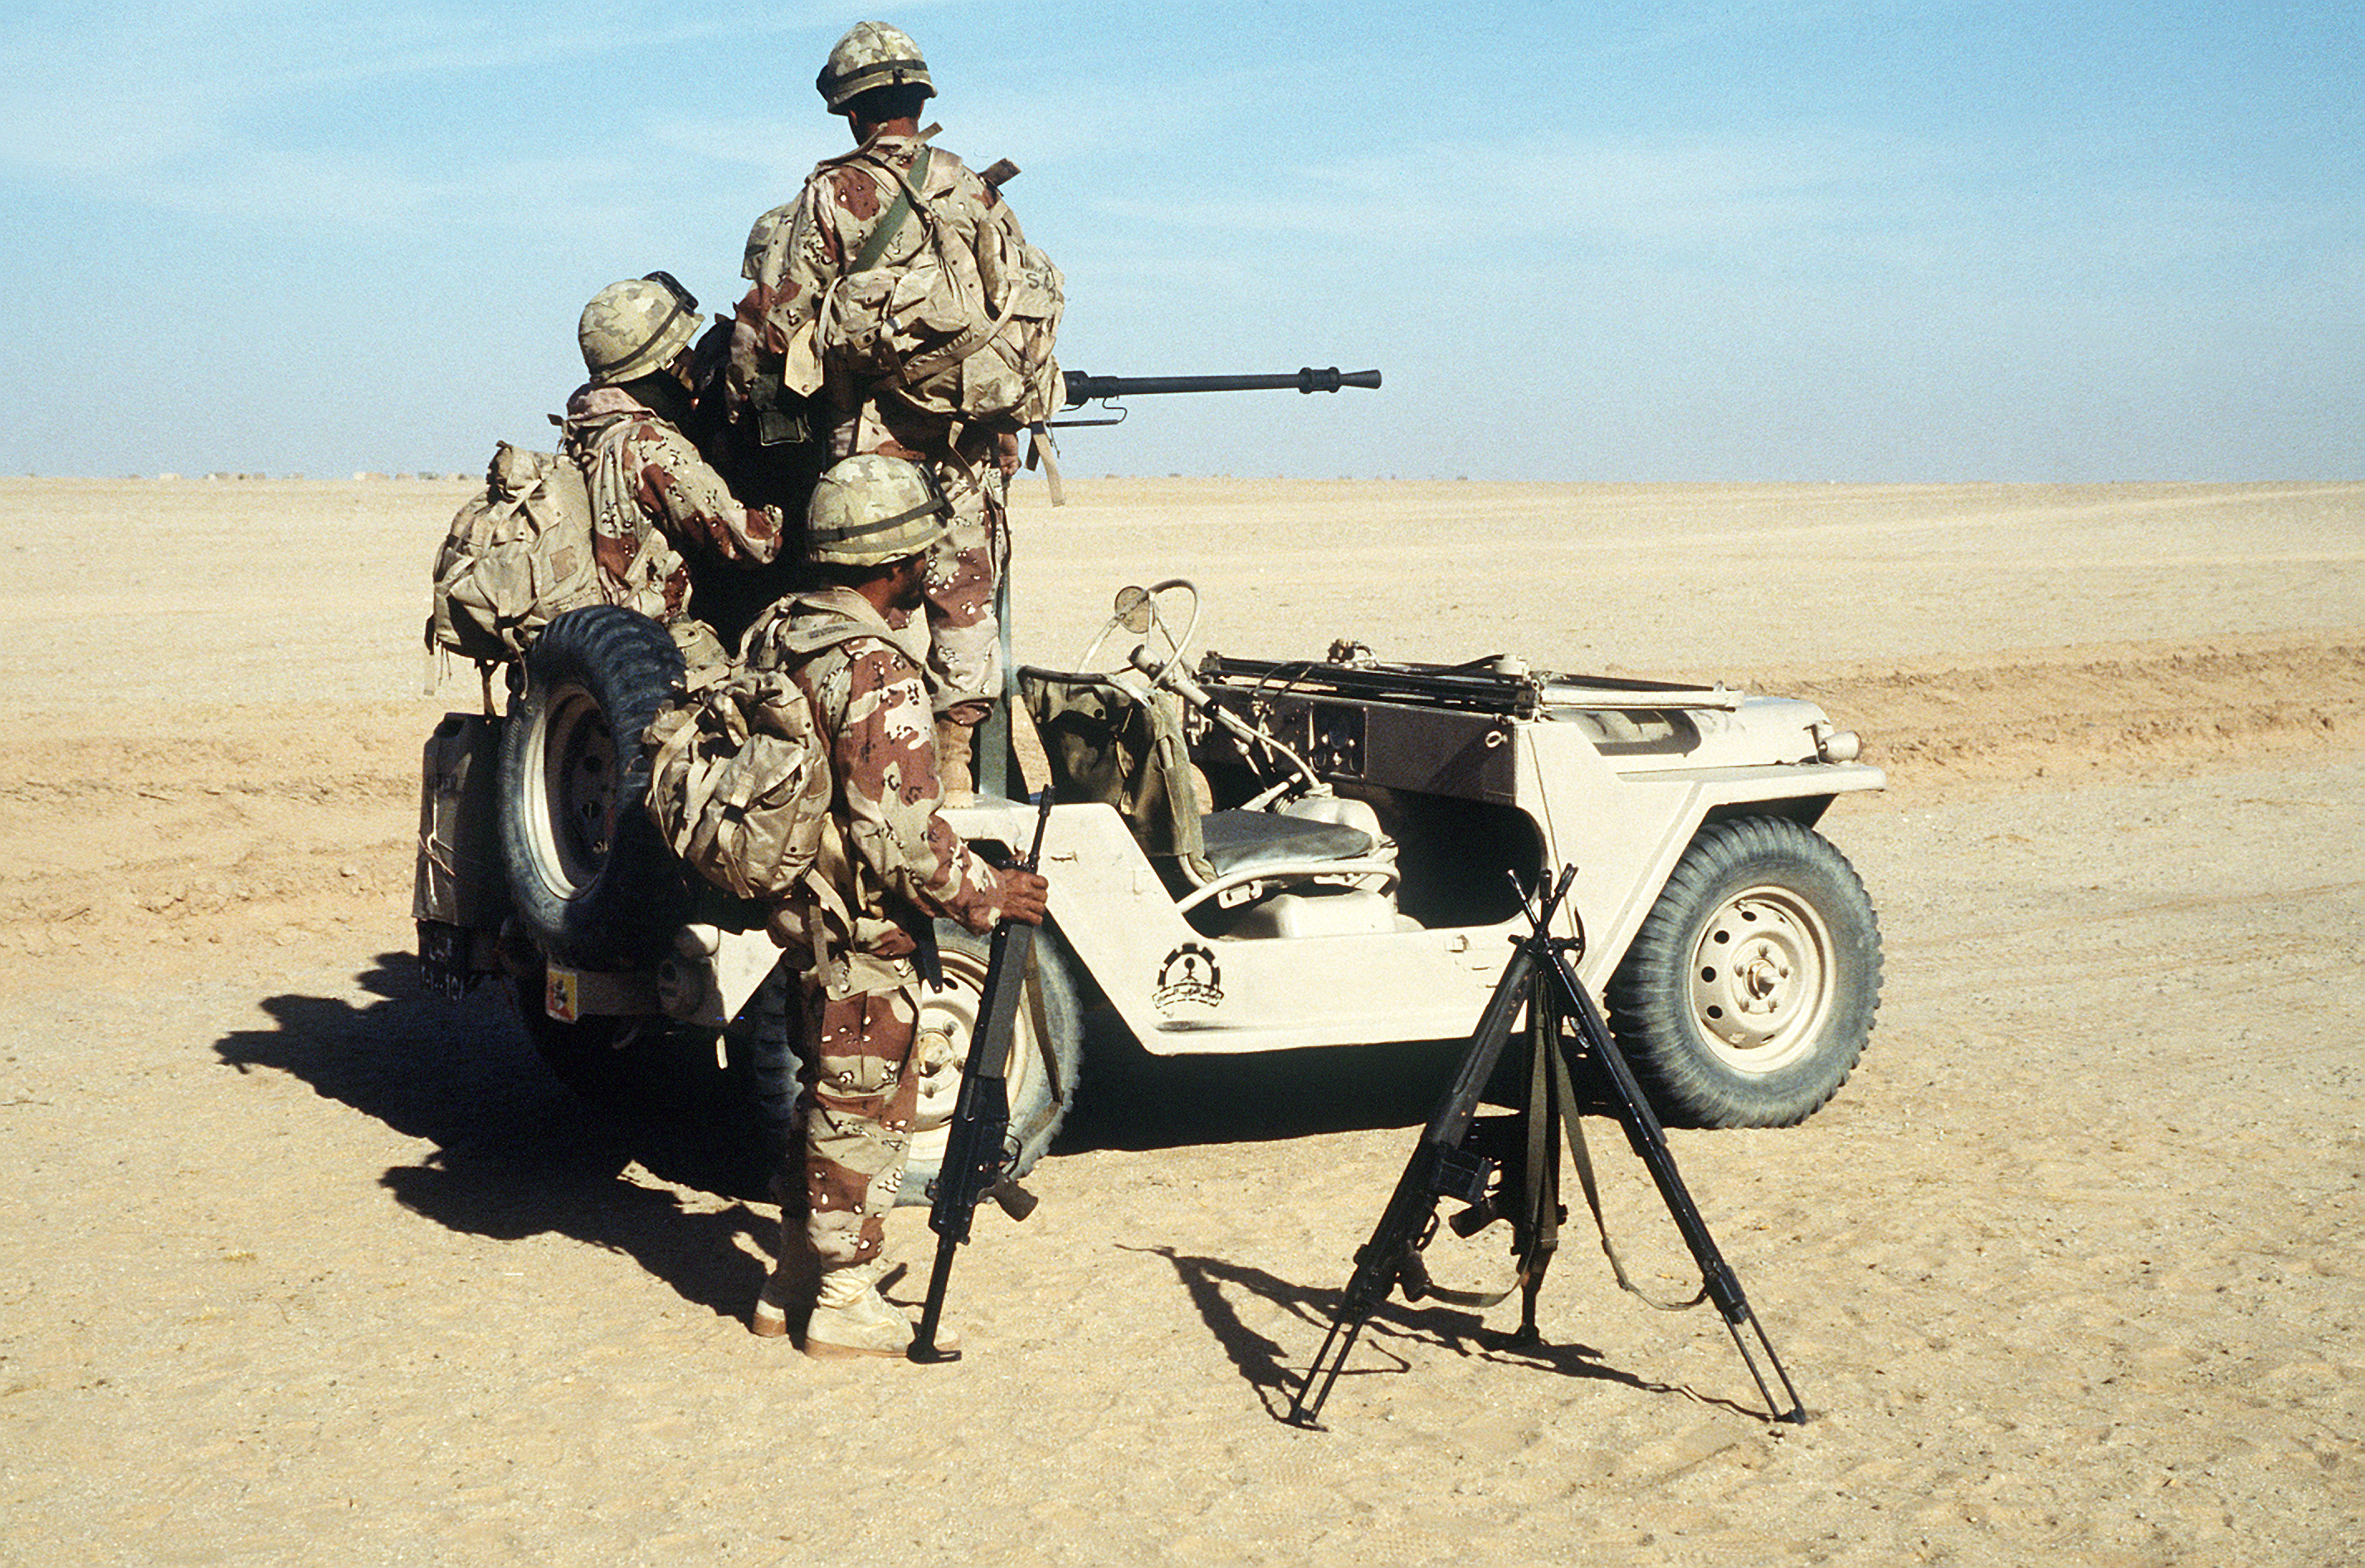 Soldiers_of_the_4th_Brigade%2C_Royal_Saudi_Land_Force_fire_an_M-2_.50-caliber_machine_gun_mounted_on_the_back_of_a_M-151_light_vehicle_during_an_Operation_Desert_Shield_capabilities_d_-_DPLA_-_ab531898e046f0a13cf24f0f8dafb384.jpeg